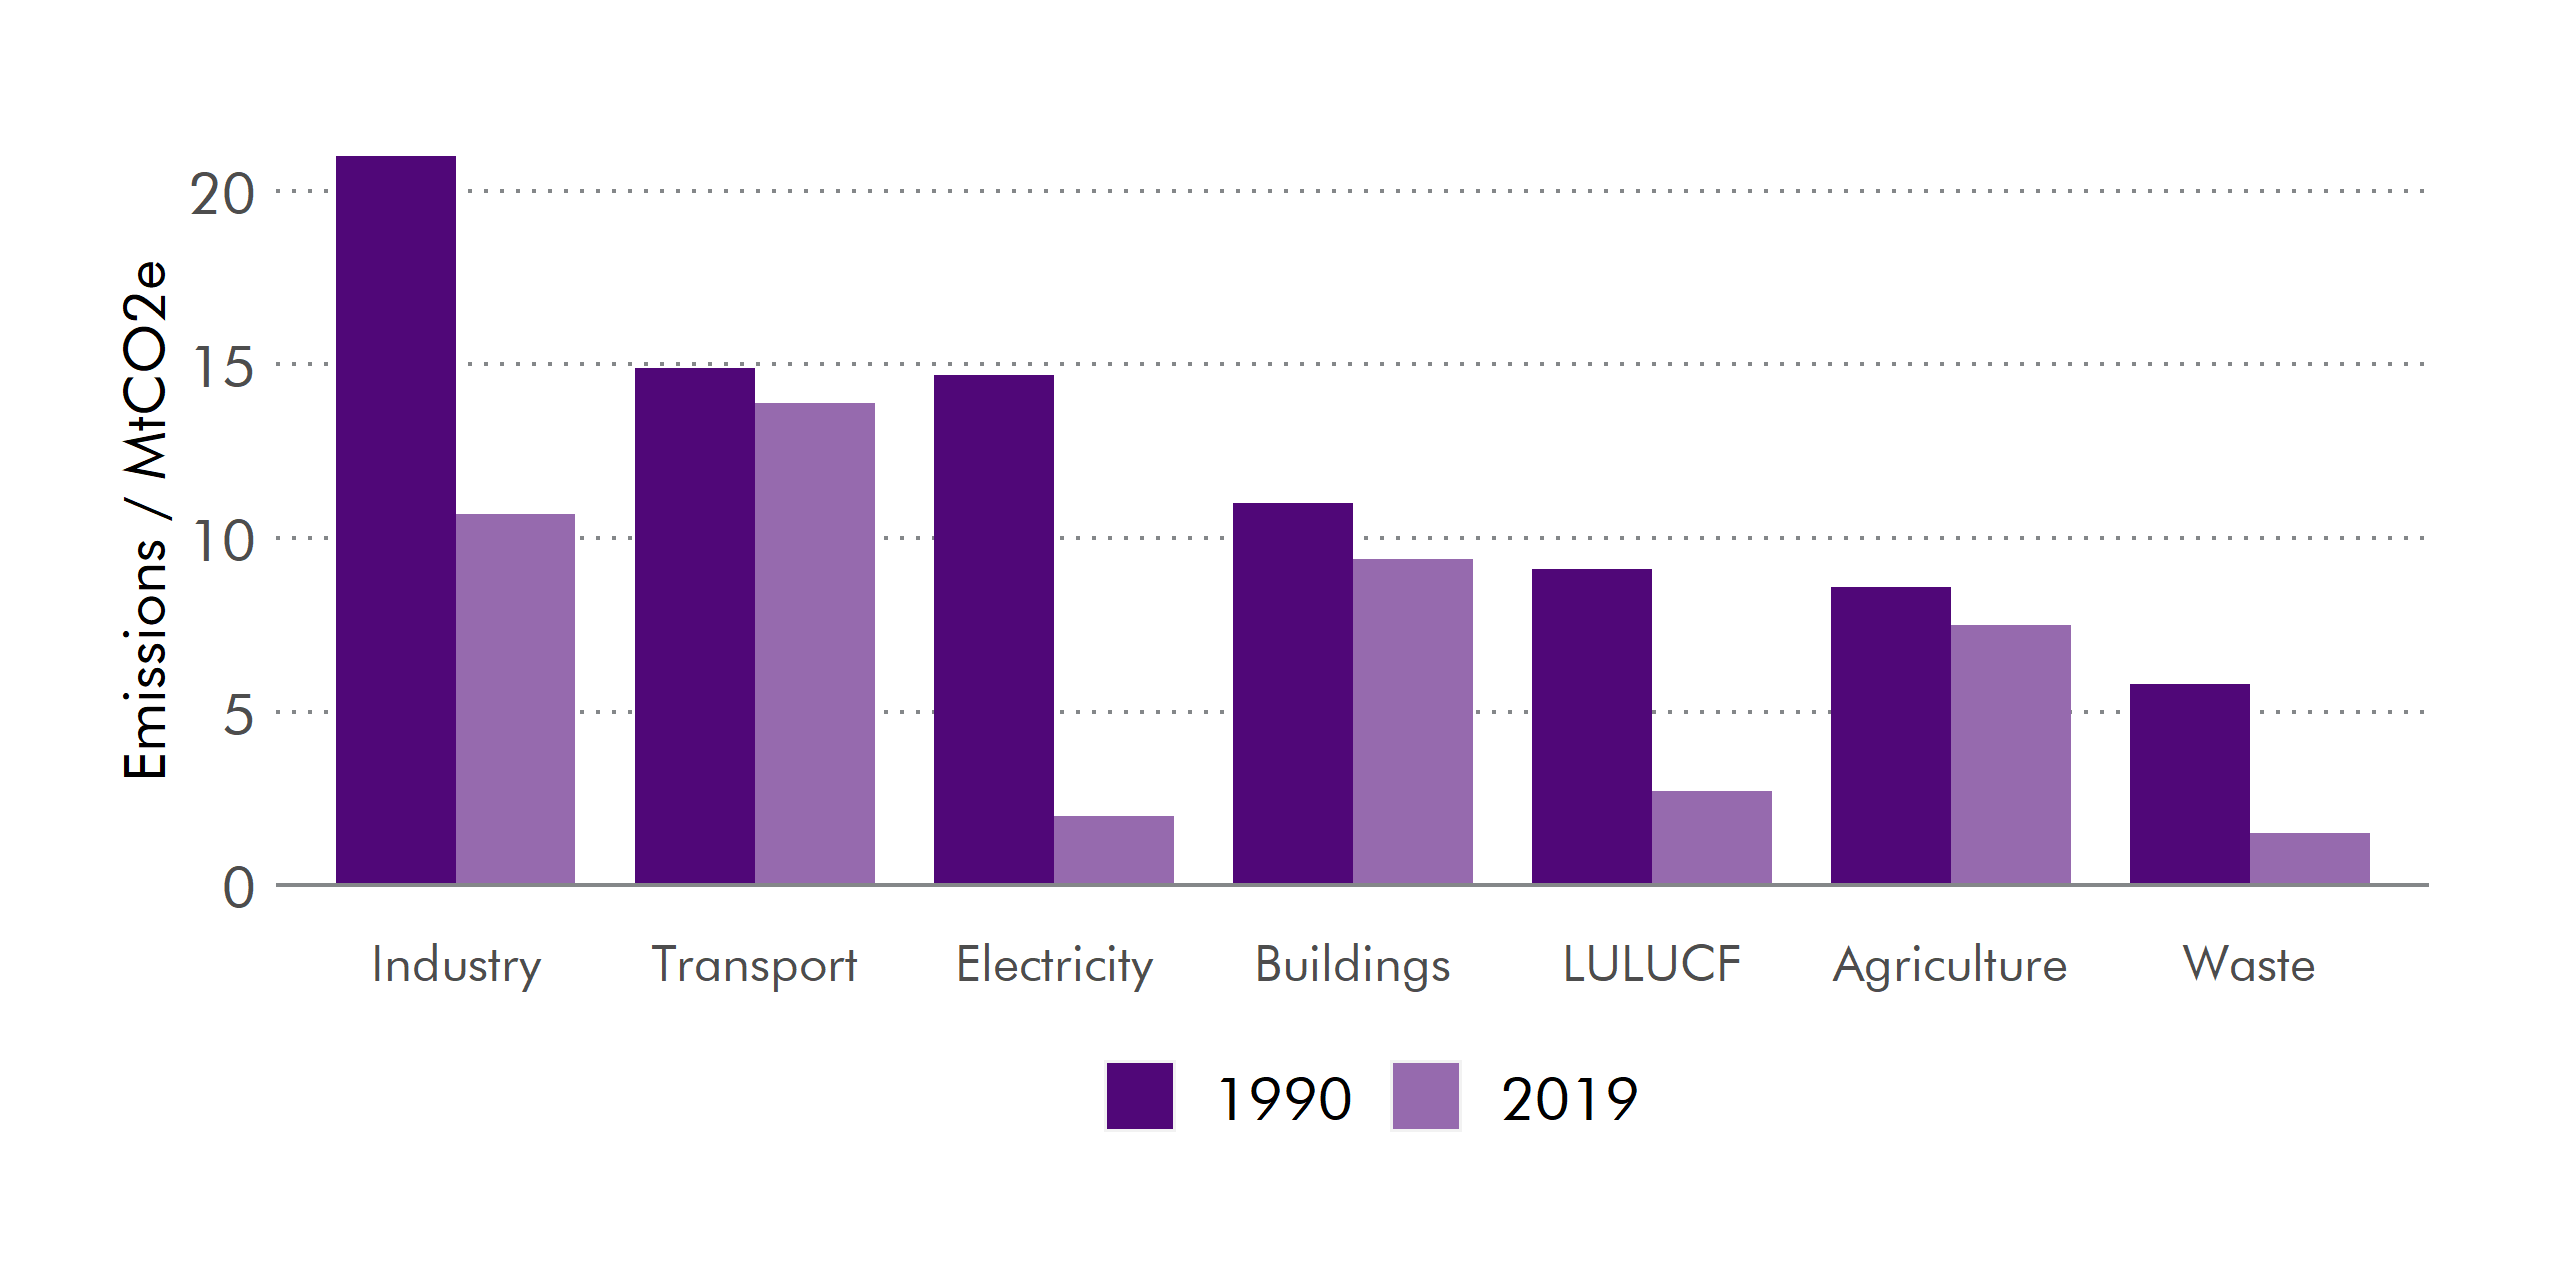 Emissions in the Electricity and Industrial sectors have fallen significantly, with the Buildings, Transport and Agriculture sectors lagging.